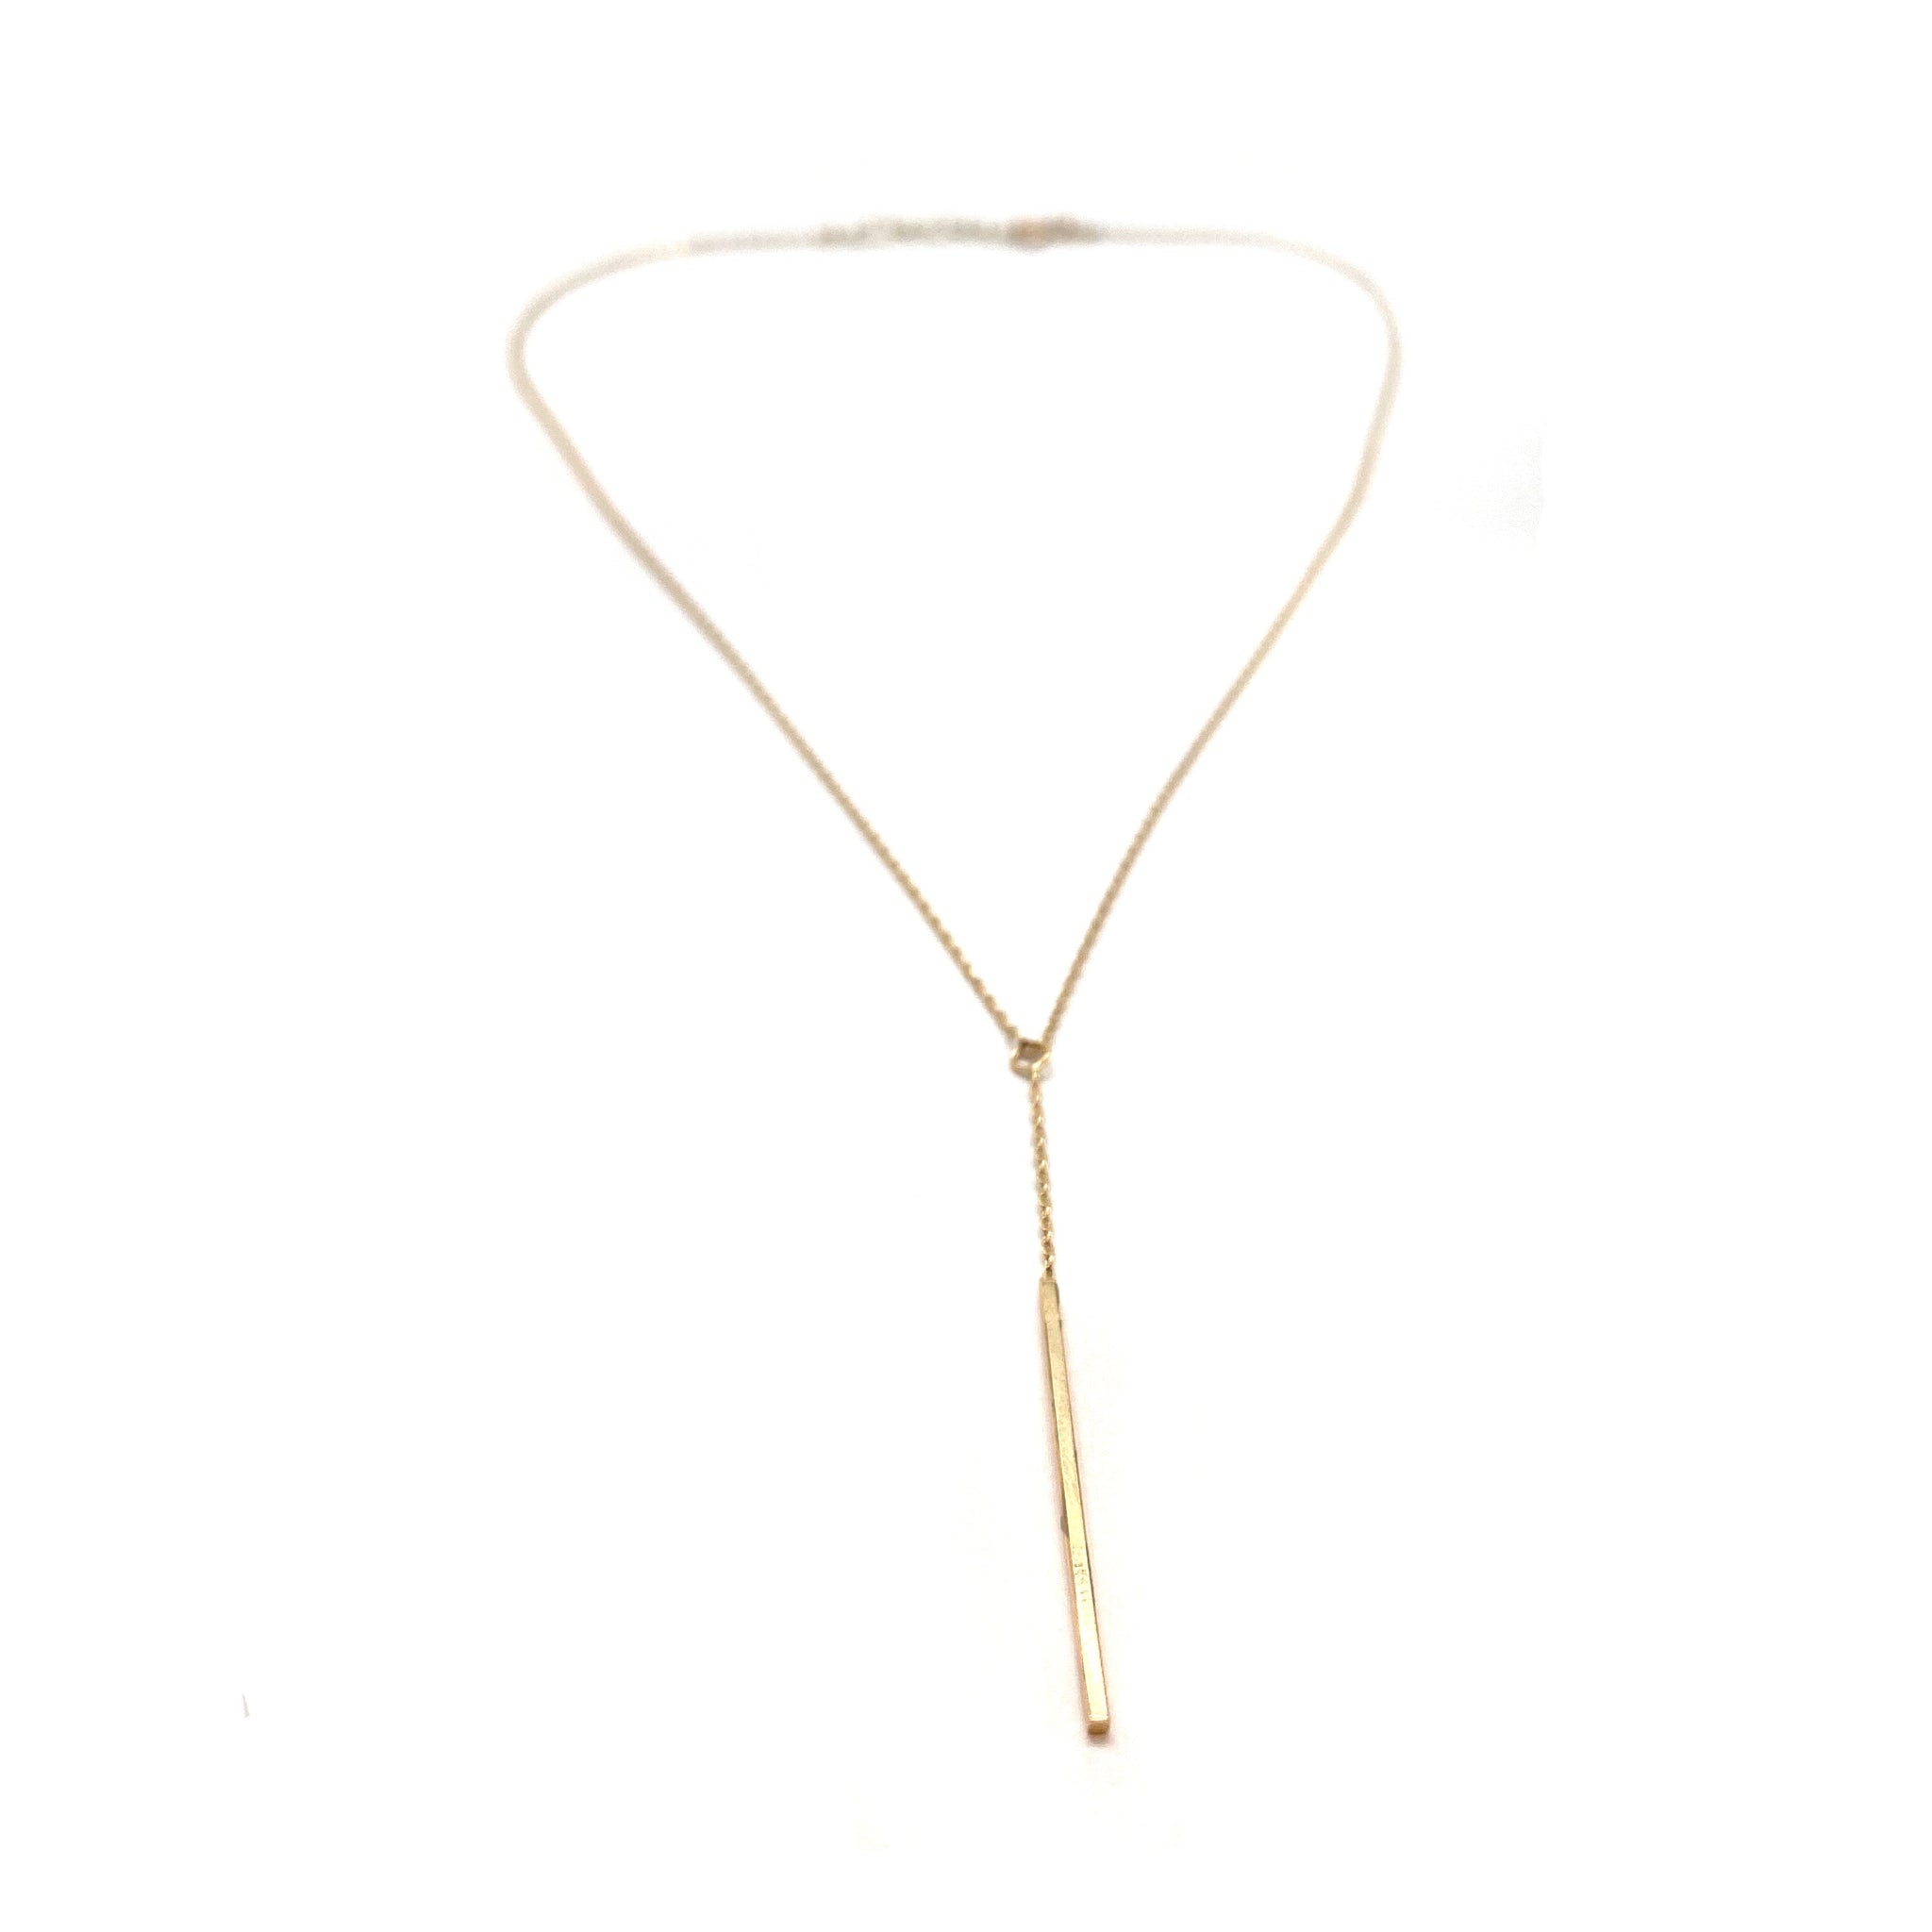 14k Yellow, White or Rose Gold Circle & Bar Lariat Necklace, 16-18 In. -  The Black Bow Jewelry Company